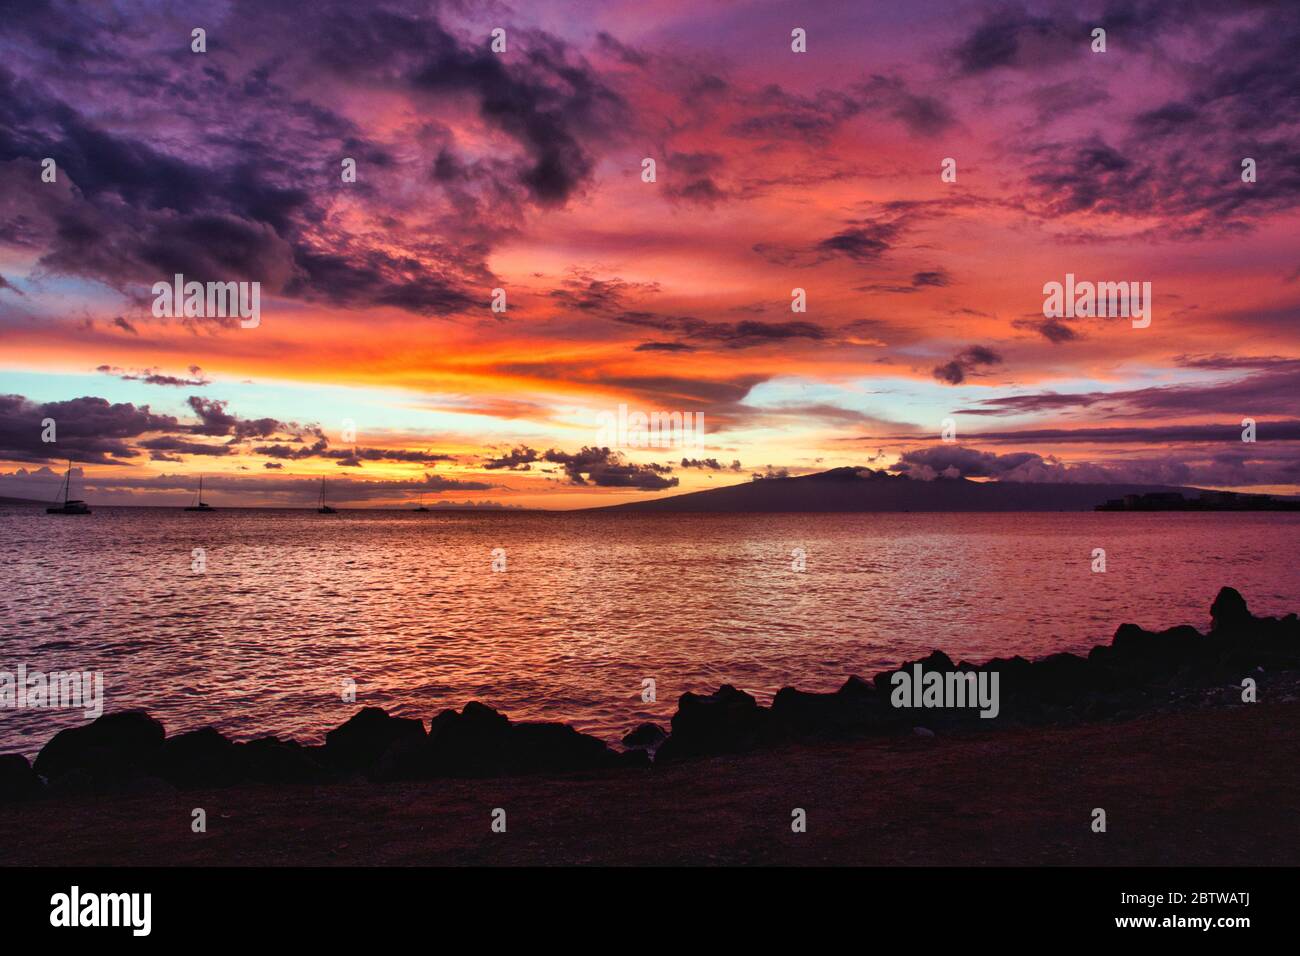 Amazing fiery sunset from the shores of Maui out to the nearby islands of Lanai and Molokai. Stock Photo